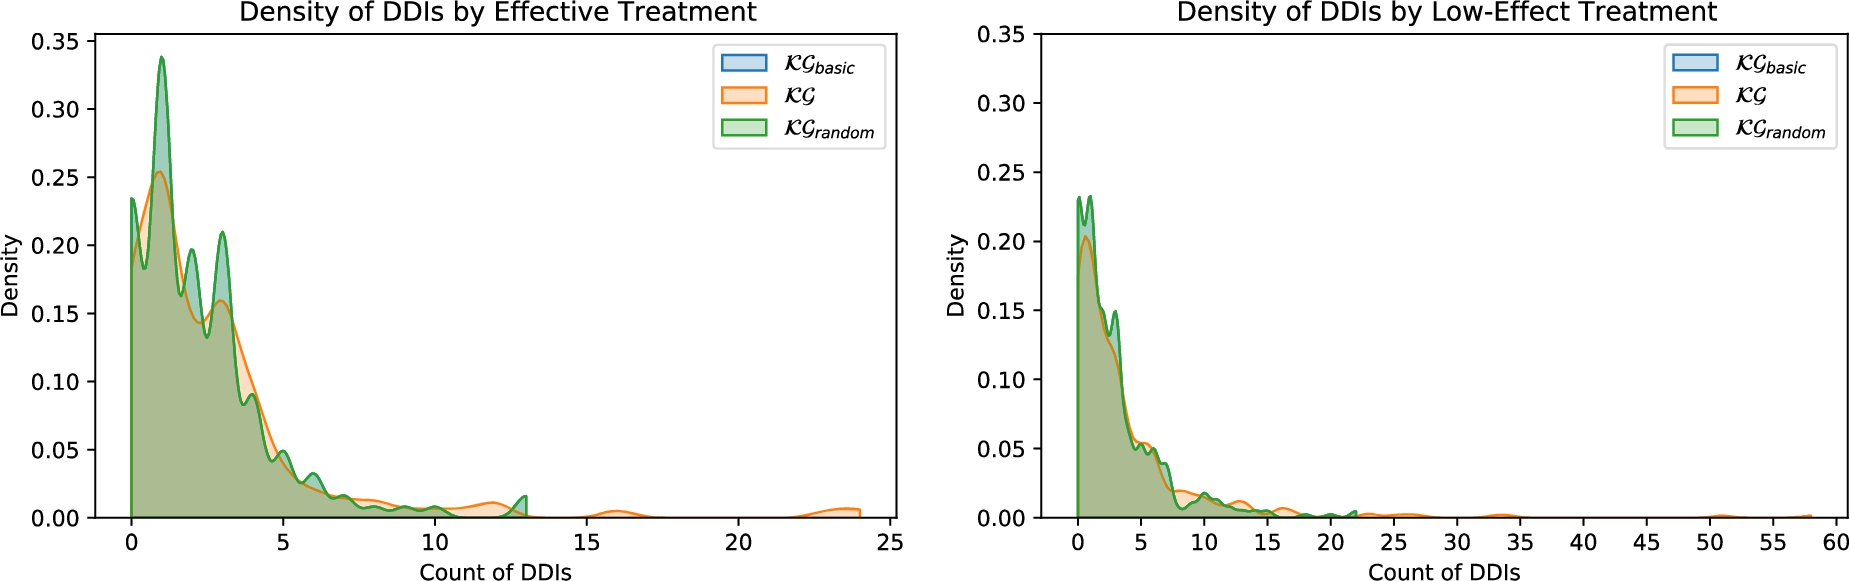 The distribution of DDIs by treatment for each KG. Figure 14(a) shows the density of treatments by DDIs for the treatment response effective in KGbasic, KG, and KGrandom. Figure 14(b) shows the density of treatments by DDIs for the treatment response low-effect.